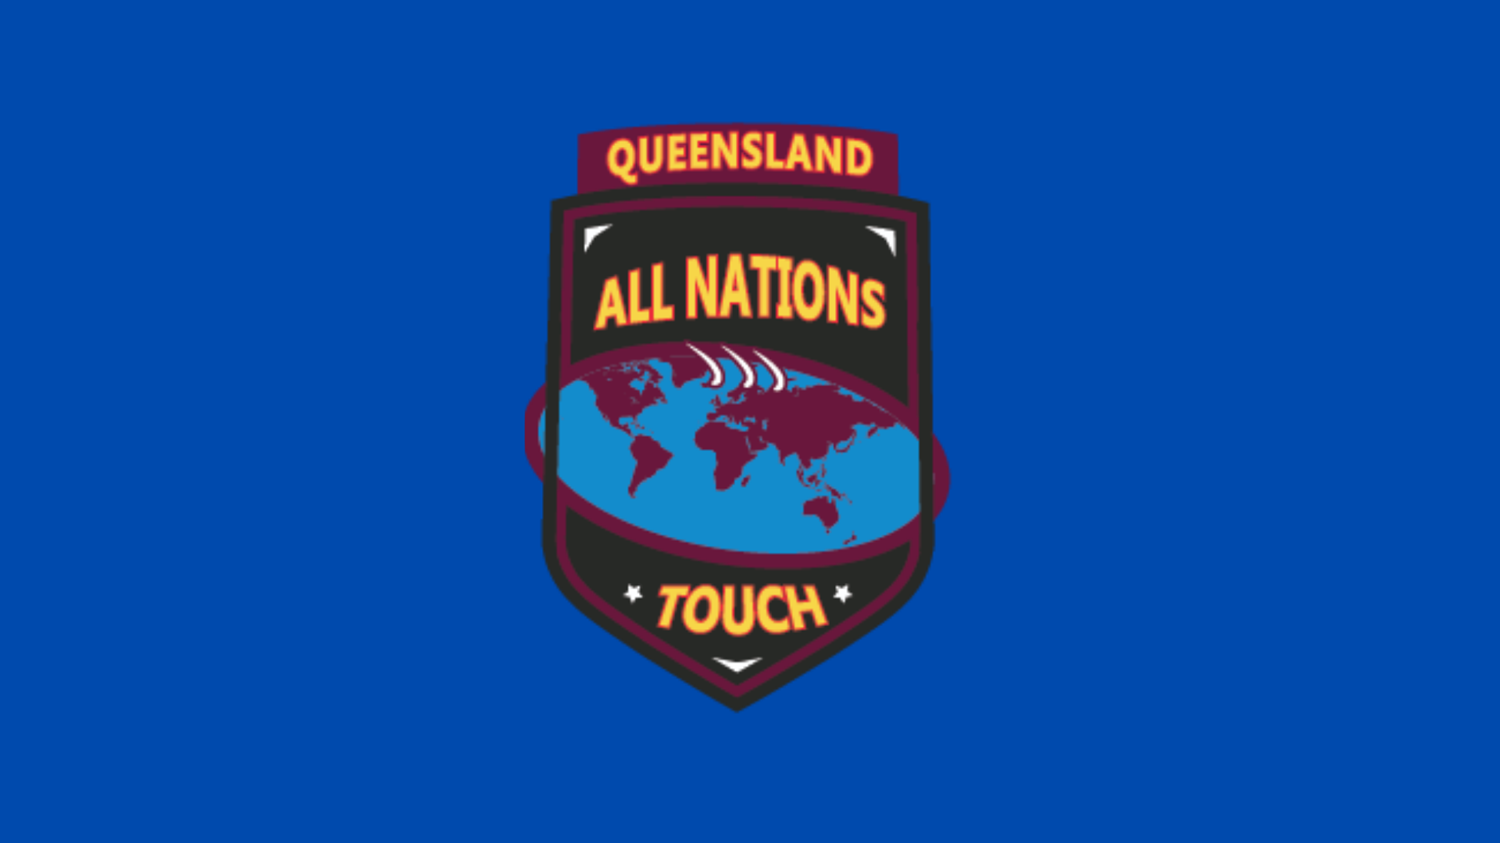 221204-QLD All Nations Masters Mixed - NZ Barbarians v Scotland Minigame Slate Image